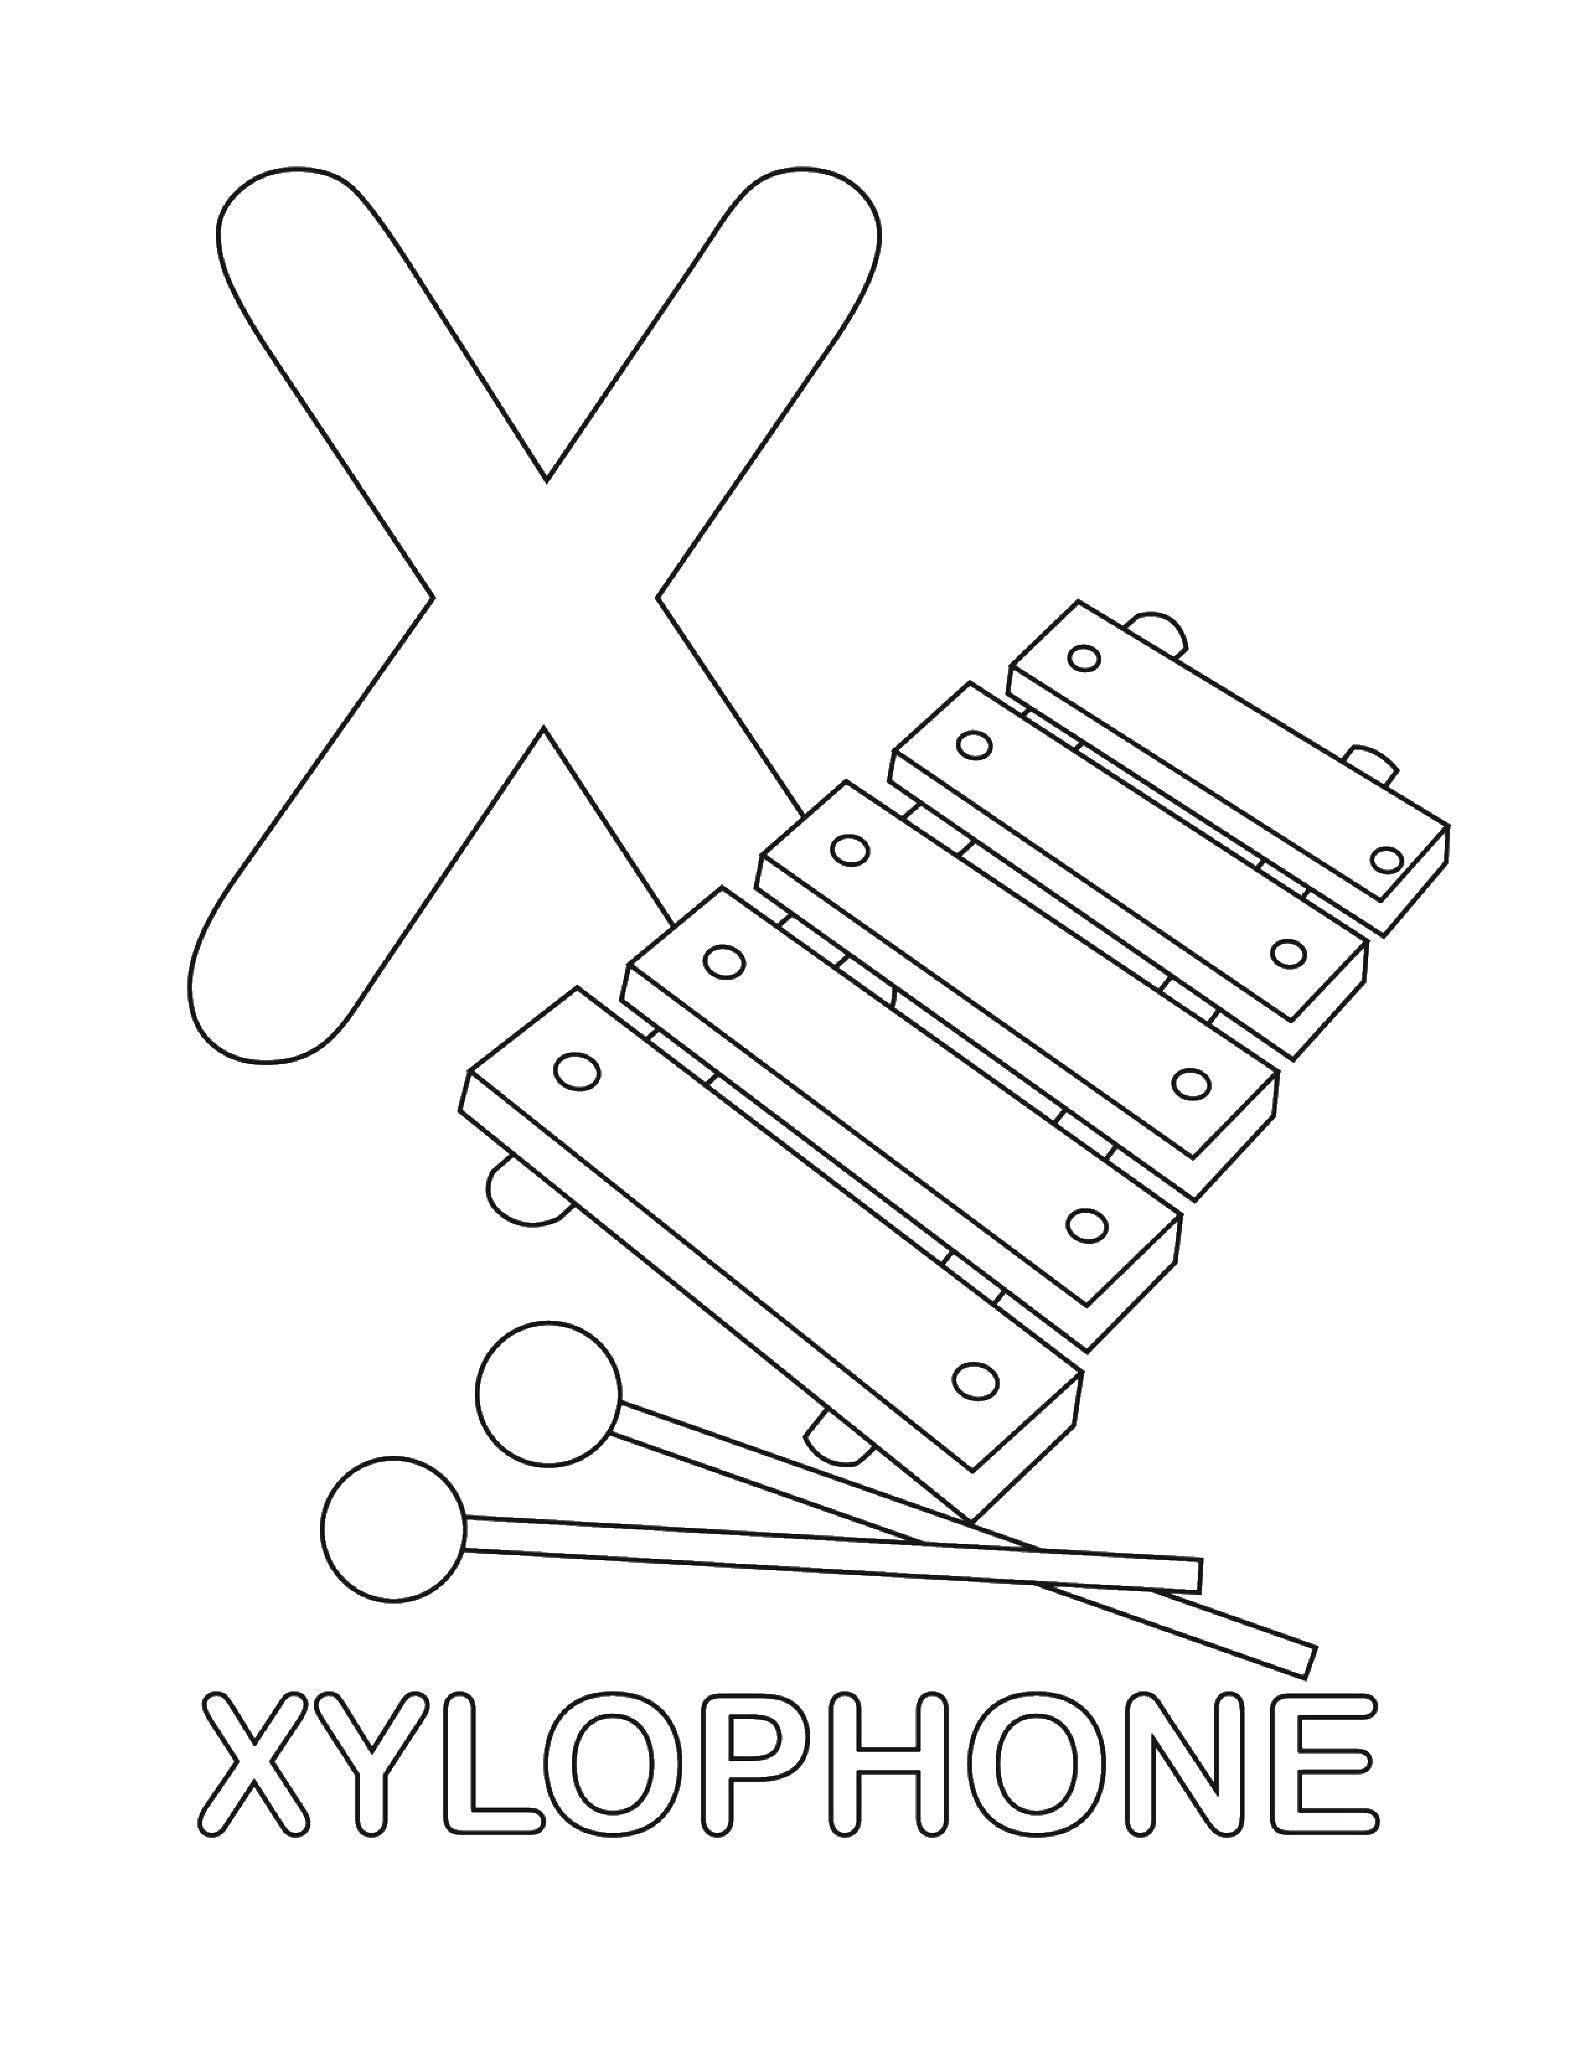 Coloring Xylophone. Category English words. Tags:  English words, xylophone.